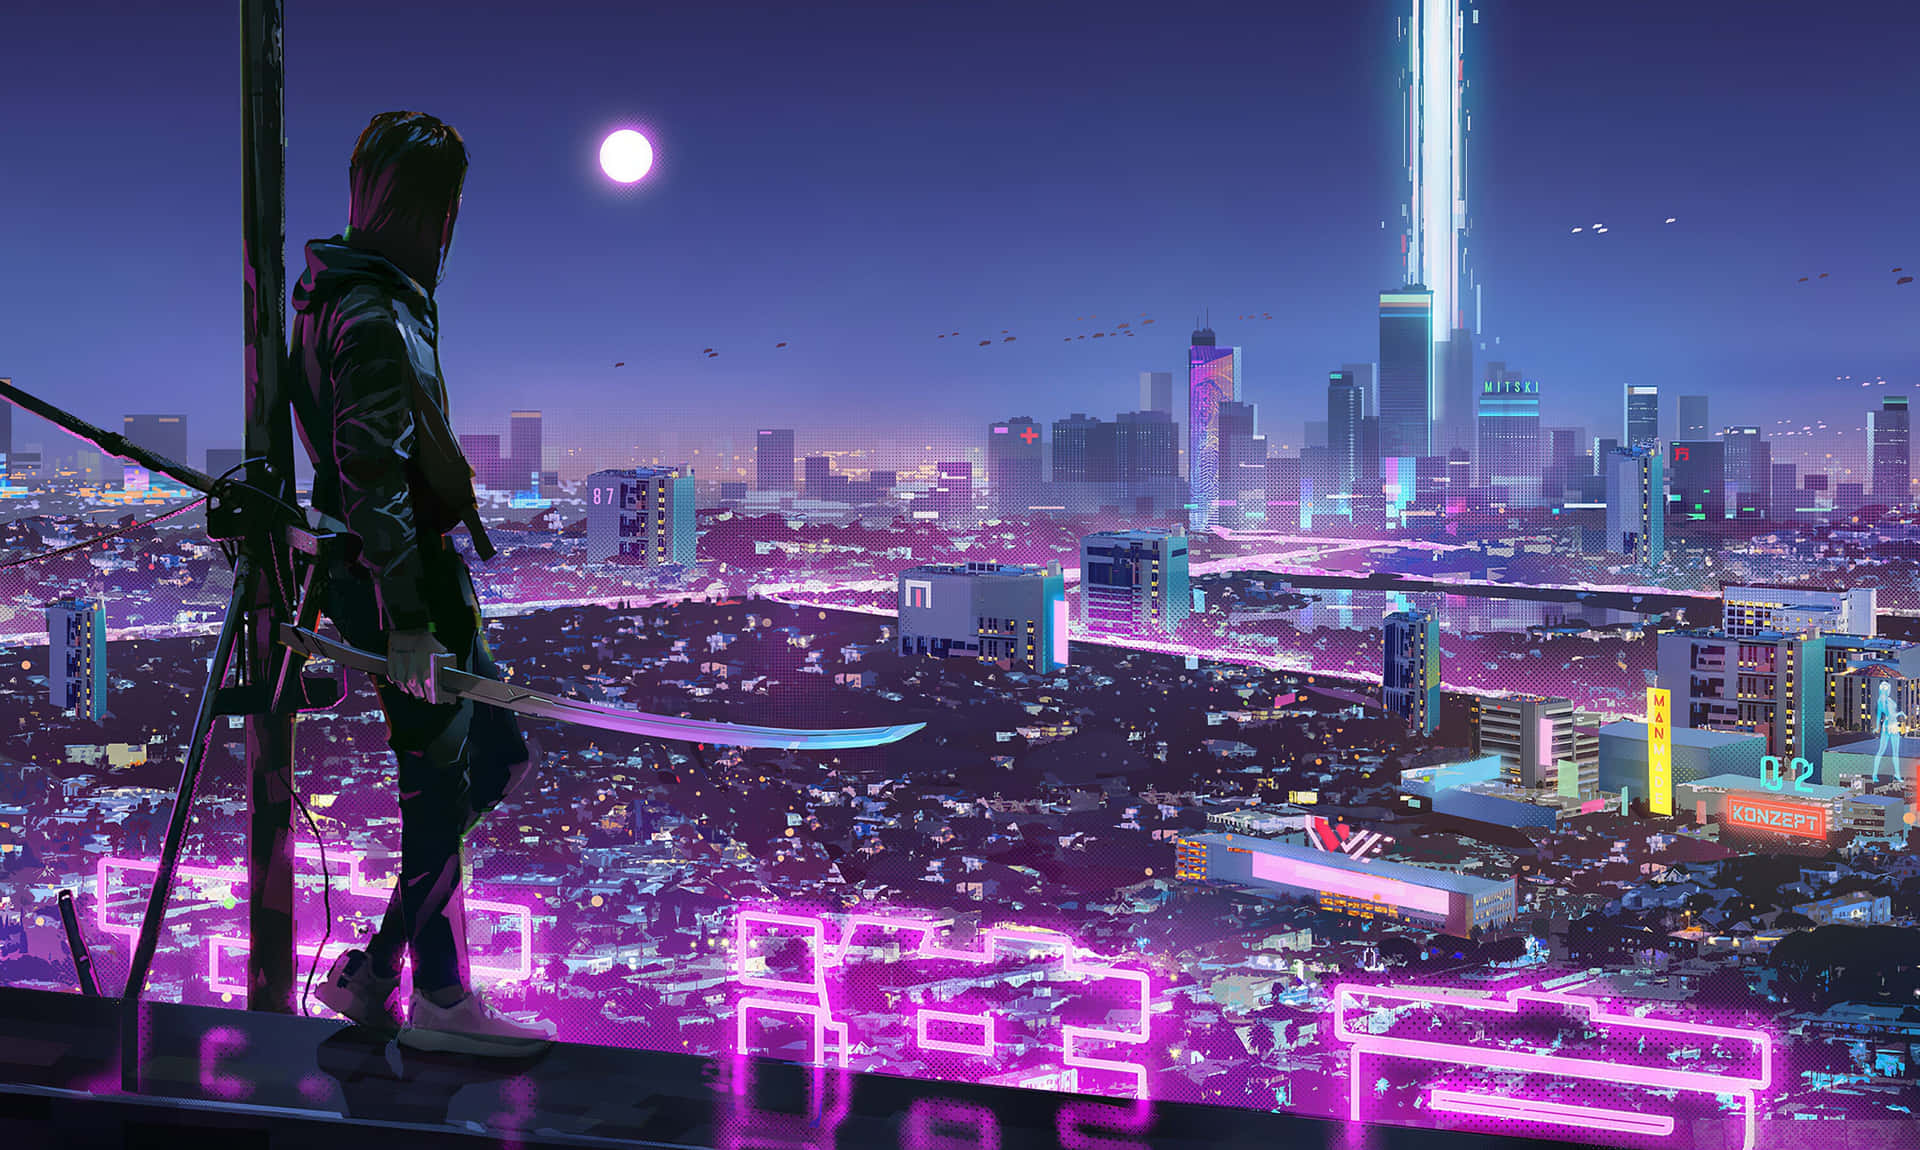 “The Glowing City of Neon City”